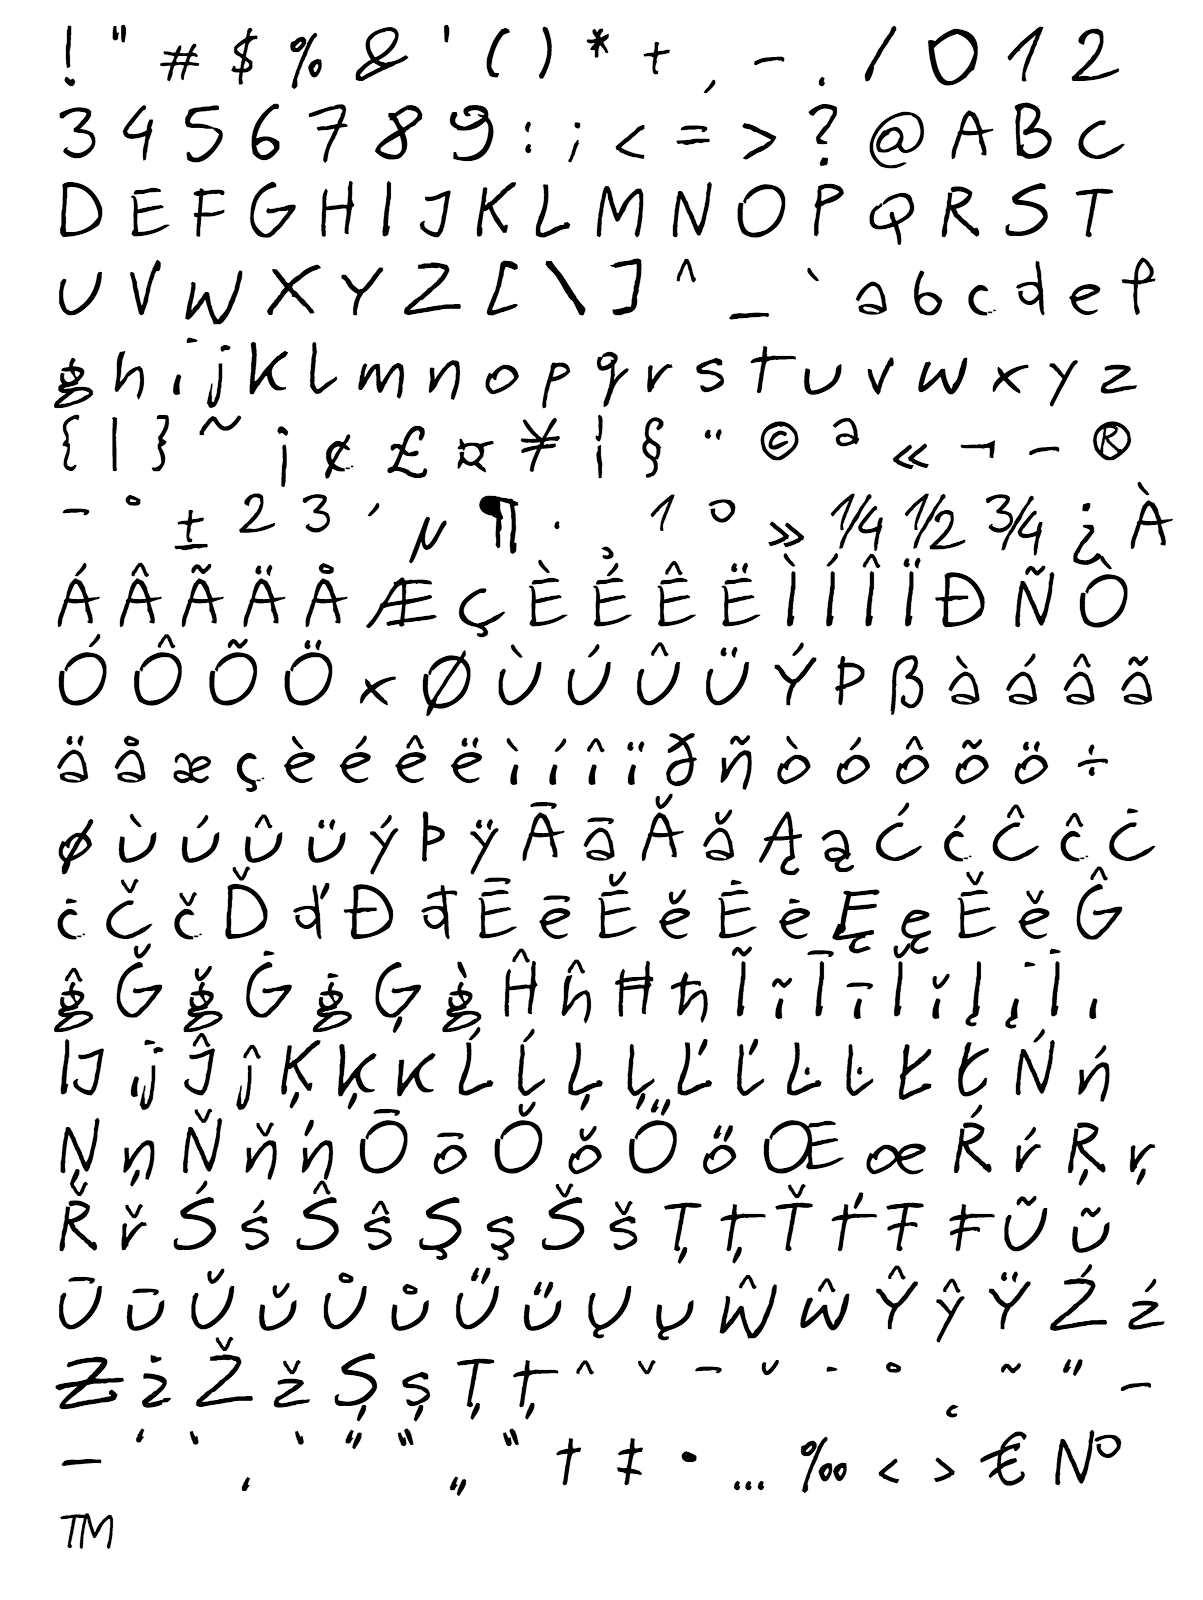 barmereczny font - complete character list